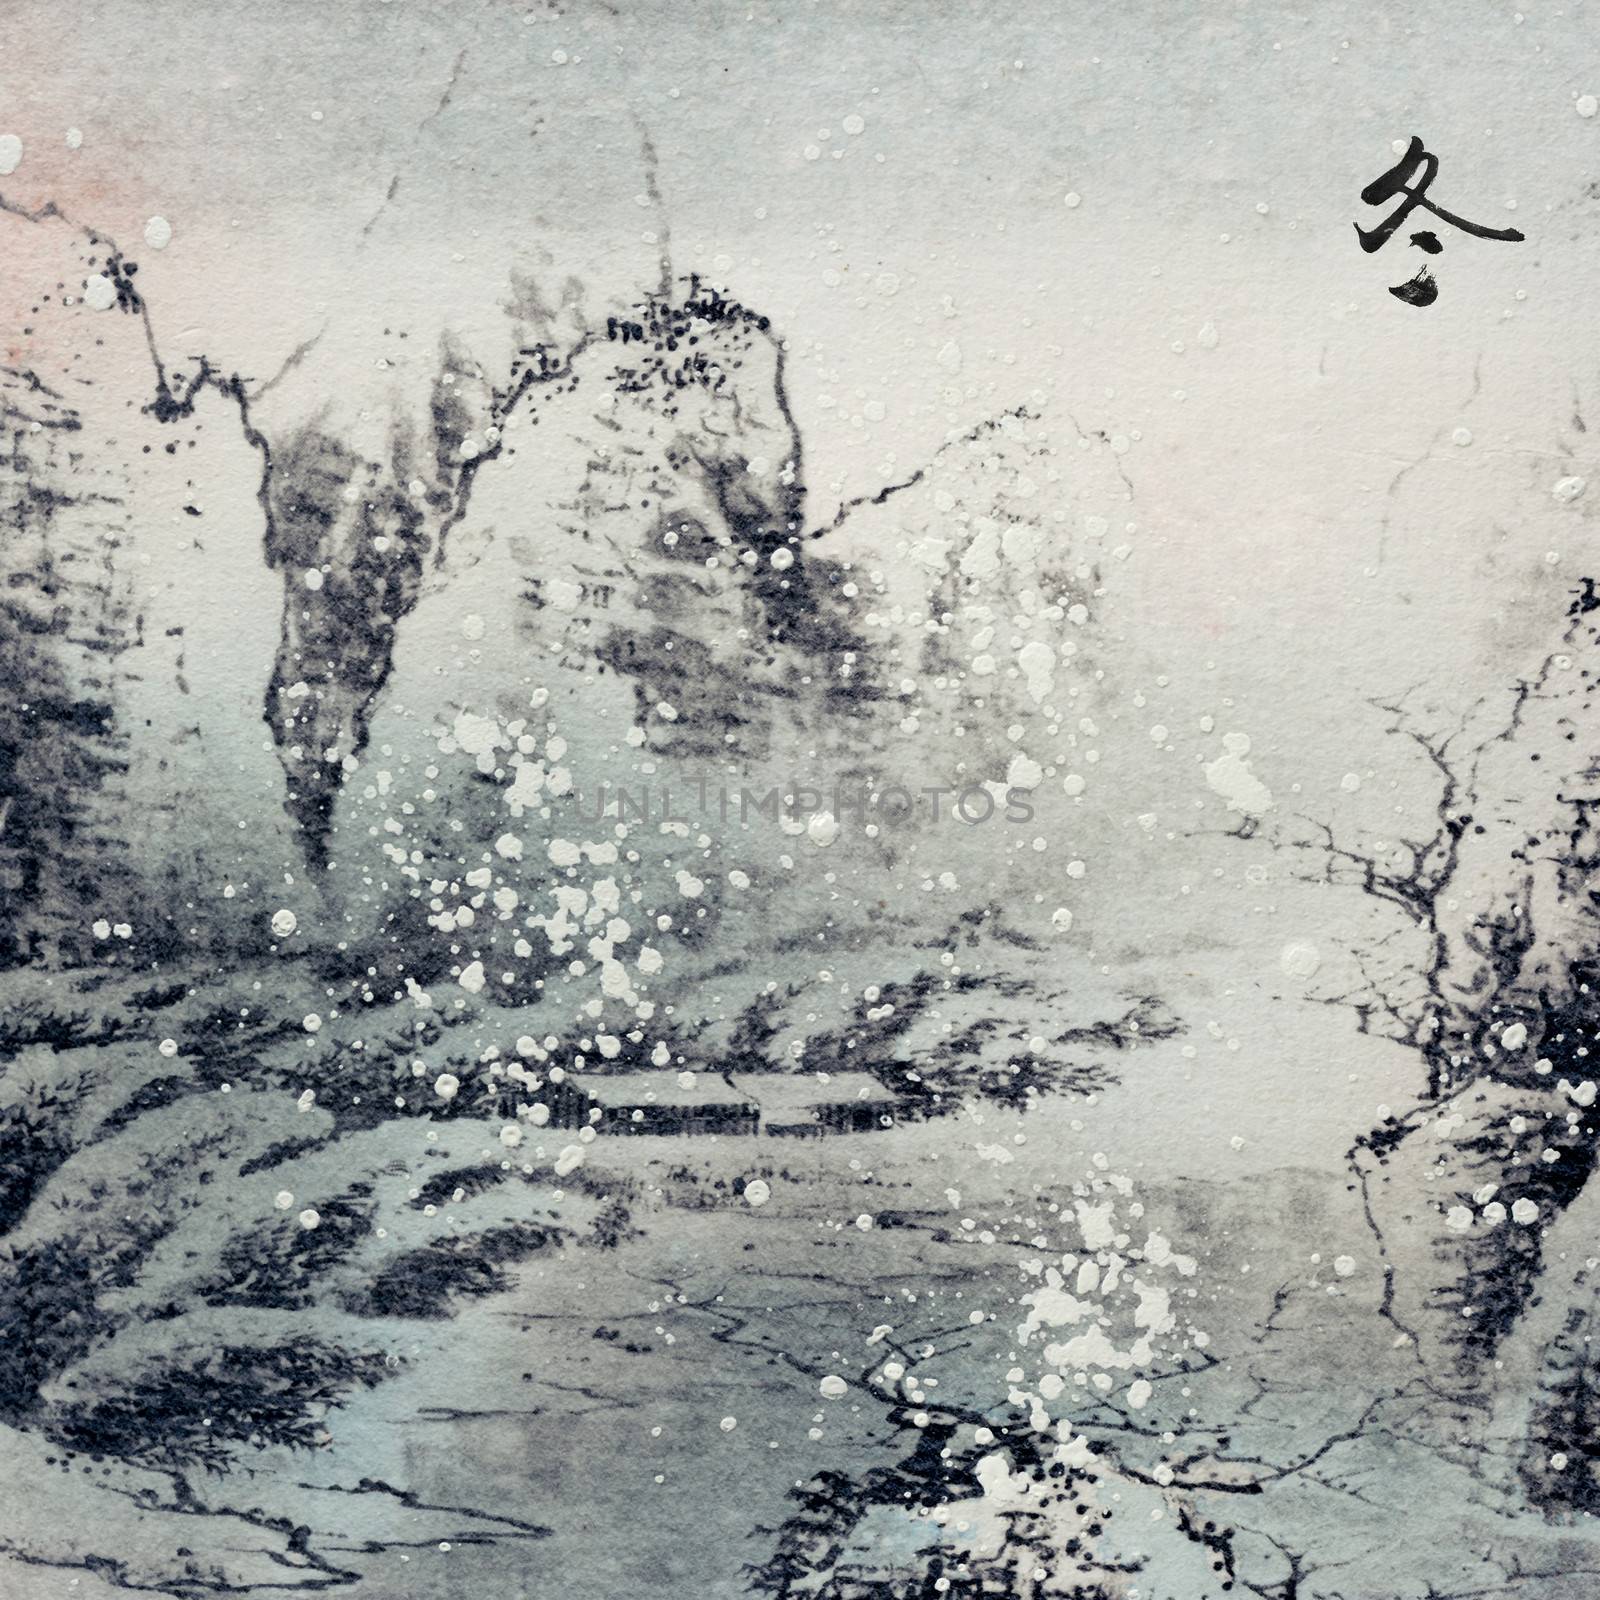 Chinese traditional ink painting, landscape of season, winter.